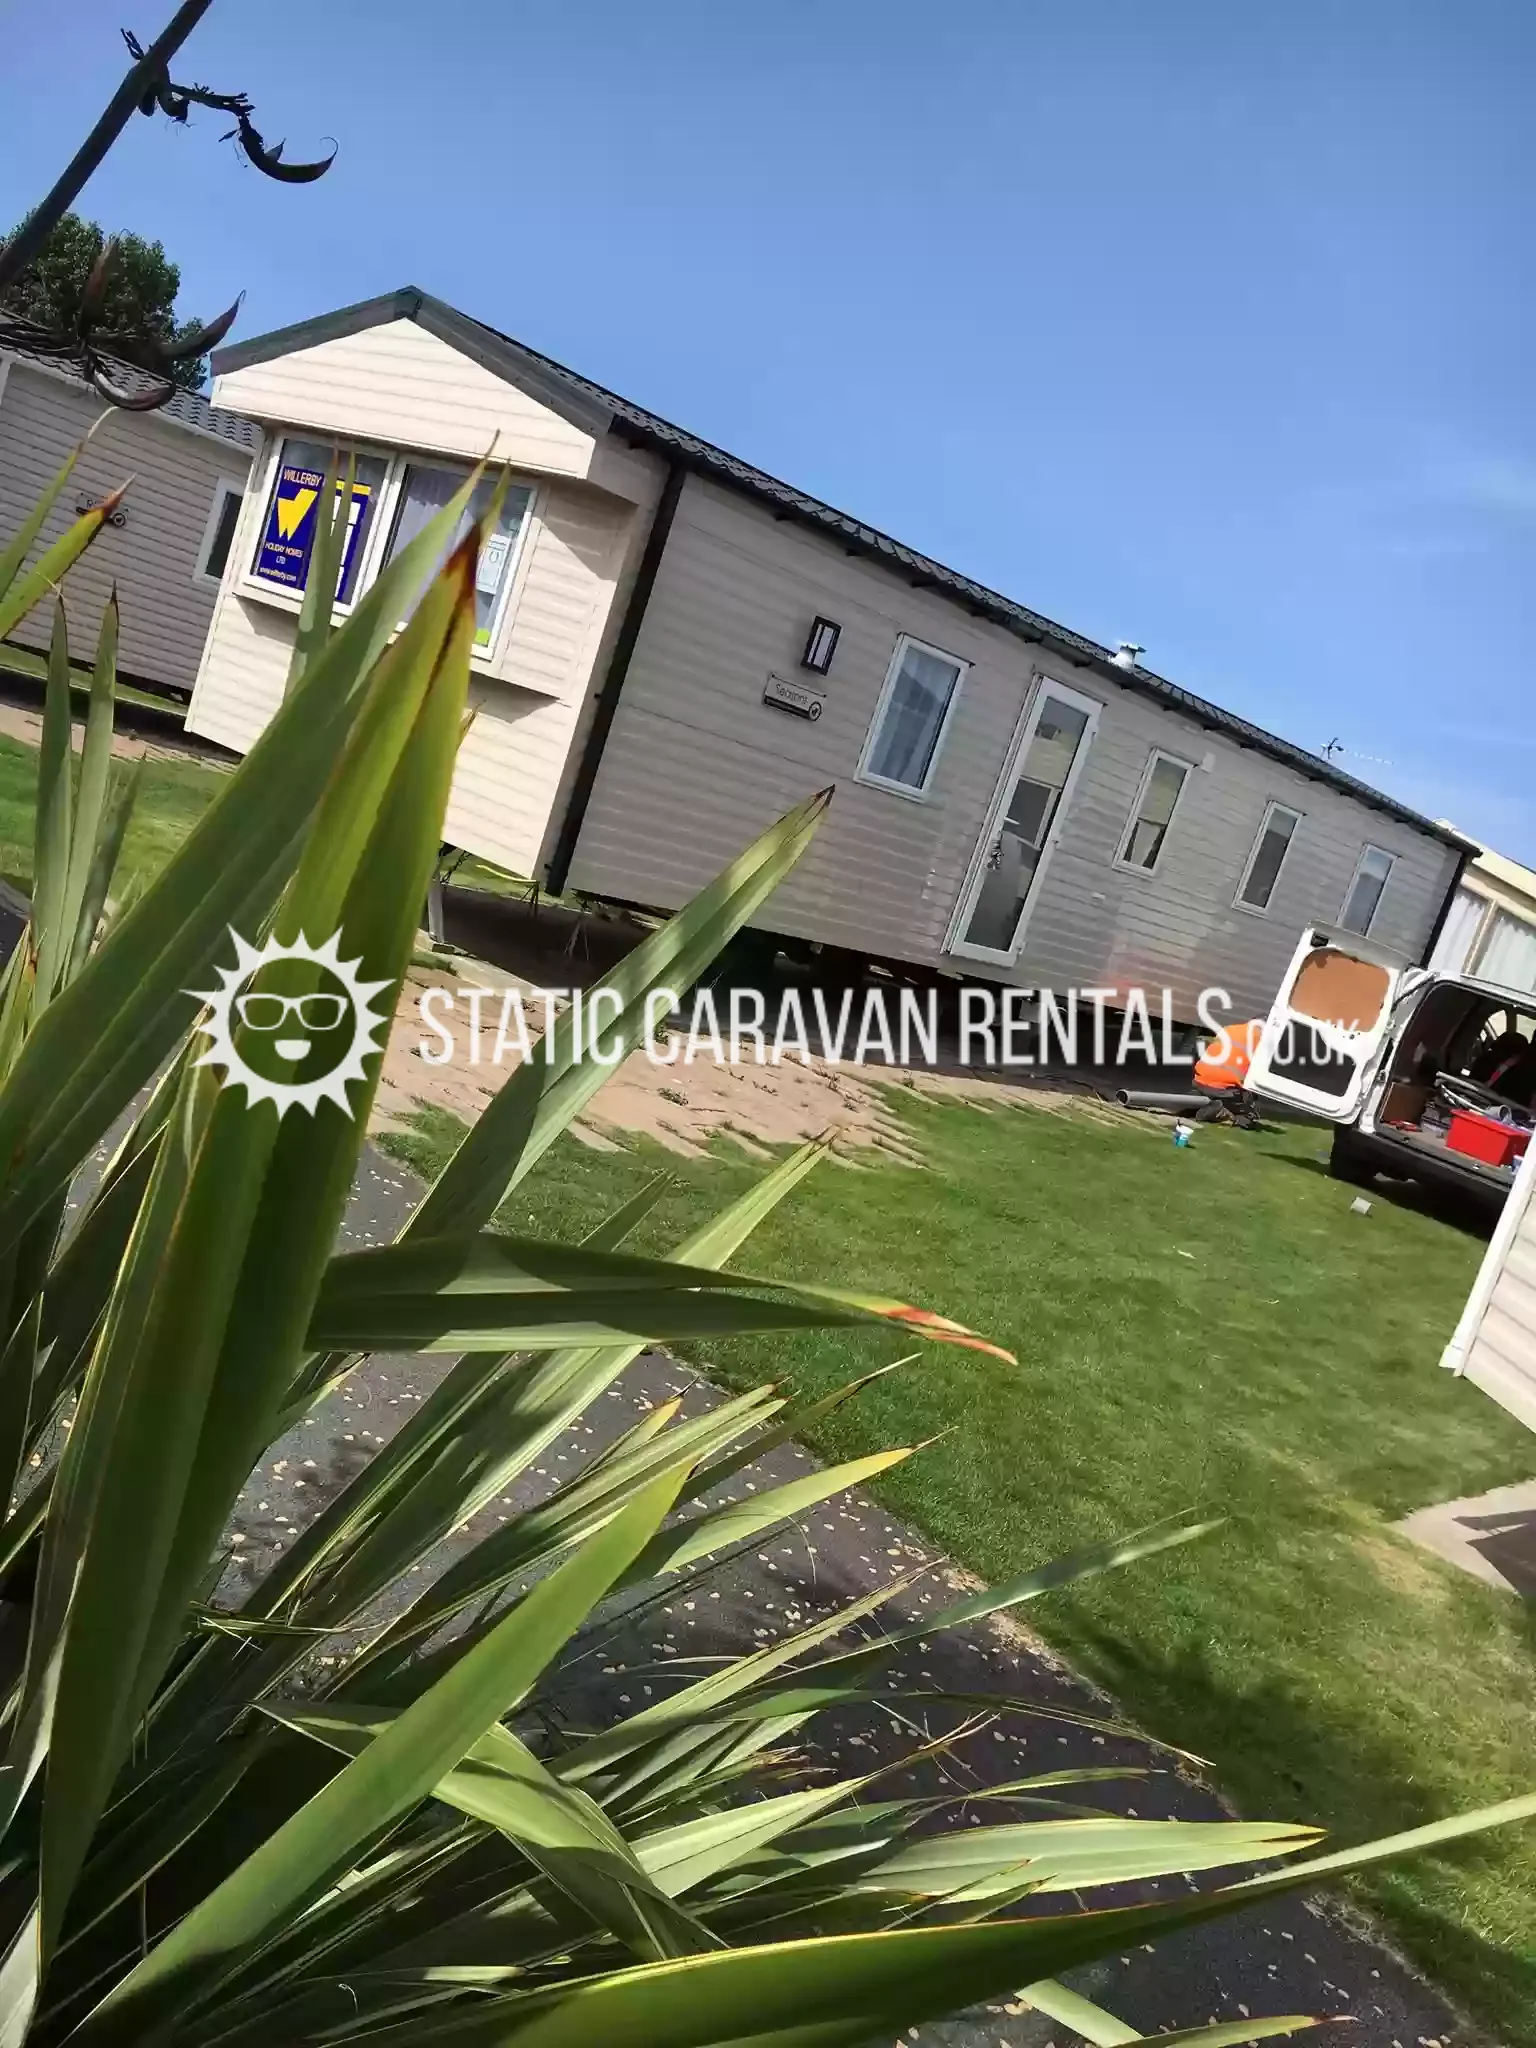 3 Private Carvan for Hire Presthaven Holiday Park, Prestatyn, Denbighshire, Wales